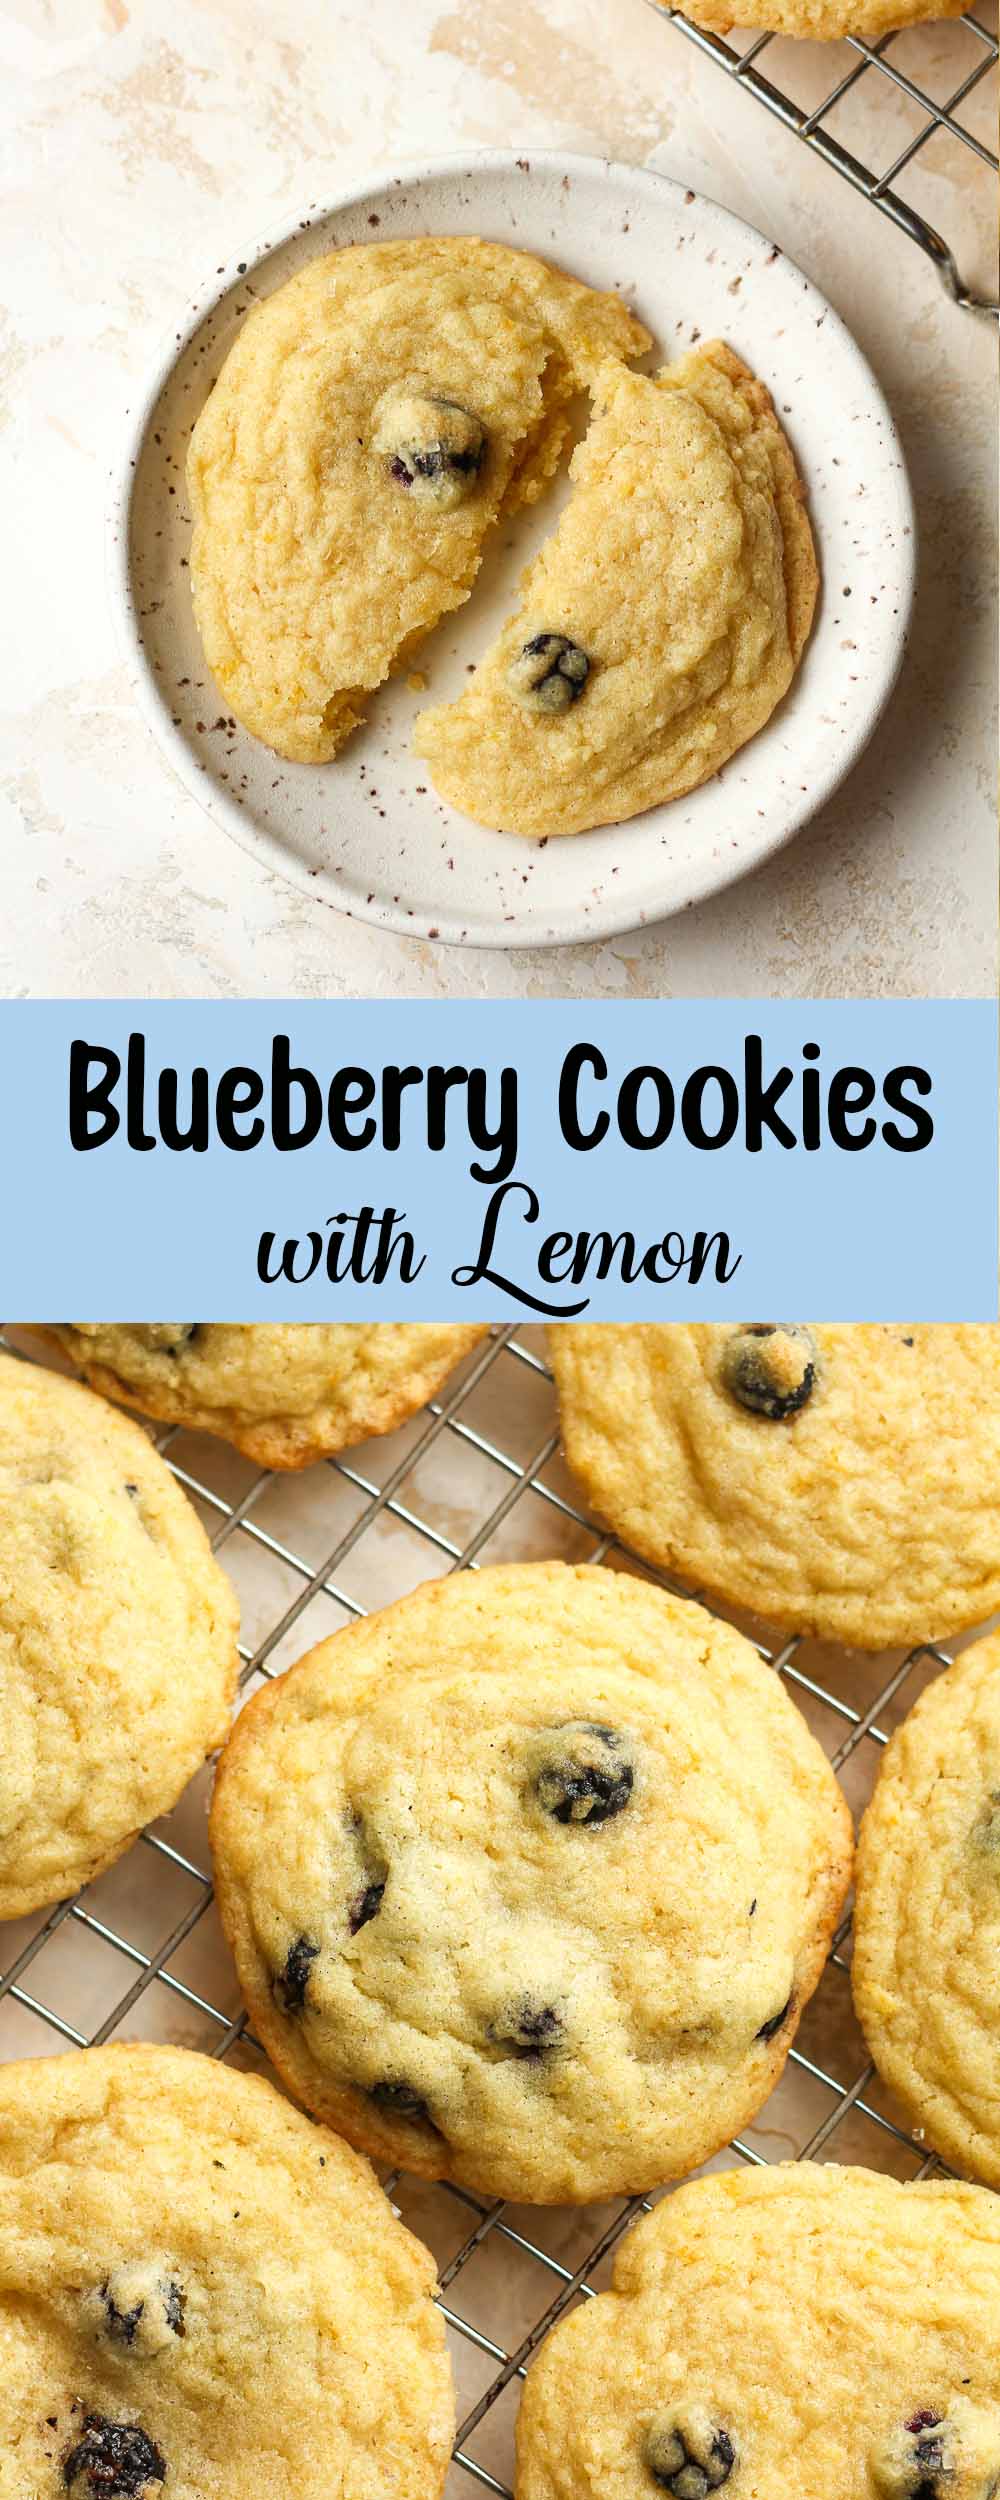 A collage of blueberry cookies with lemon